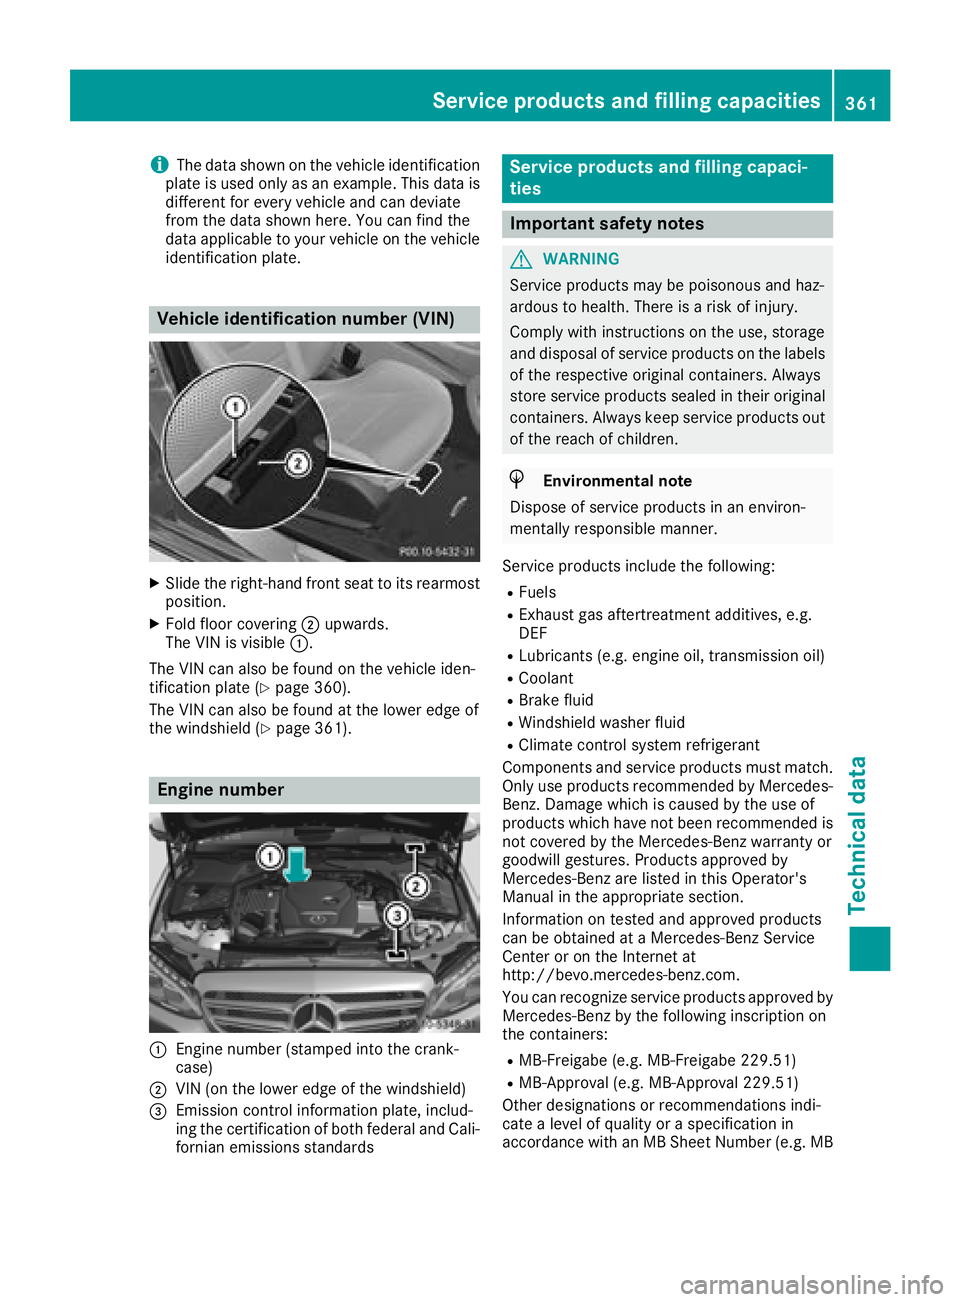 MERCEDES-BENZ C CLASS 2018 Manual PDF iThe data shown on the vehicle identification
plate is used only as an example. This data is
different for every vehicle and can deviate
from the data shown here. You can find the
data applicable to y